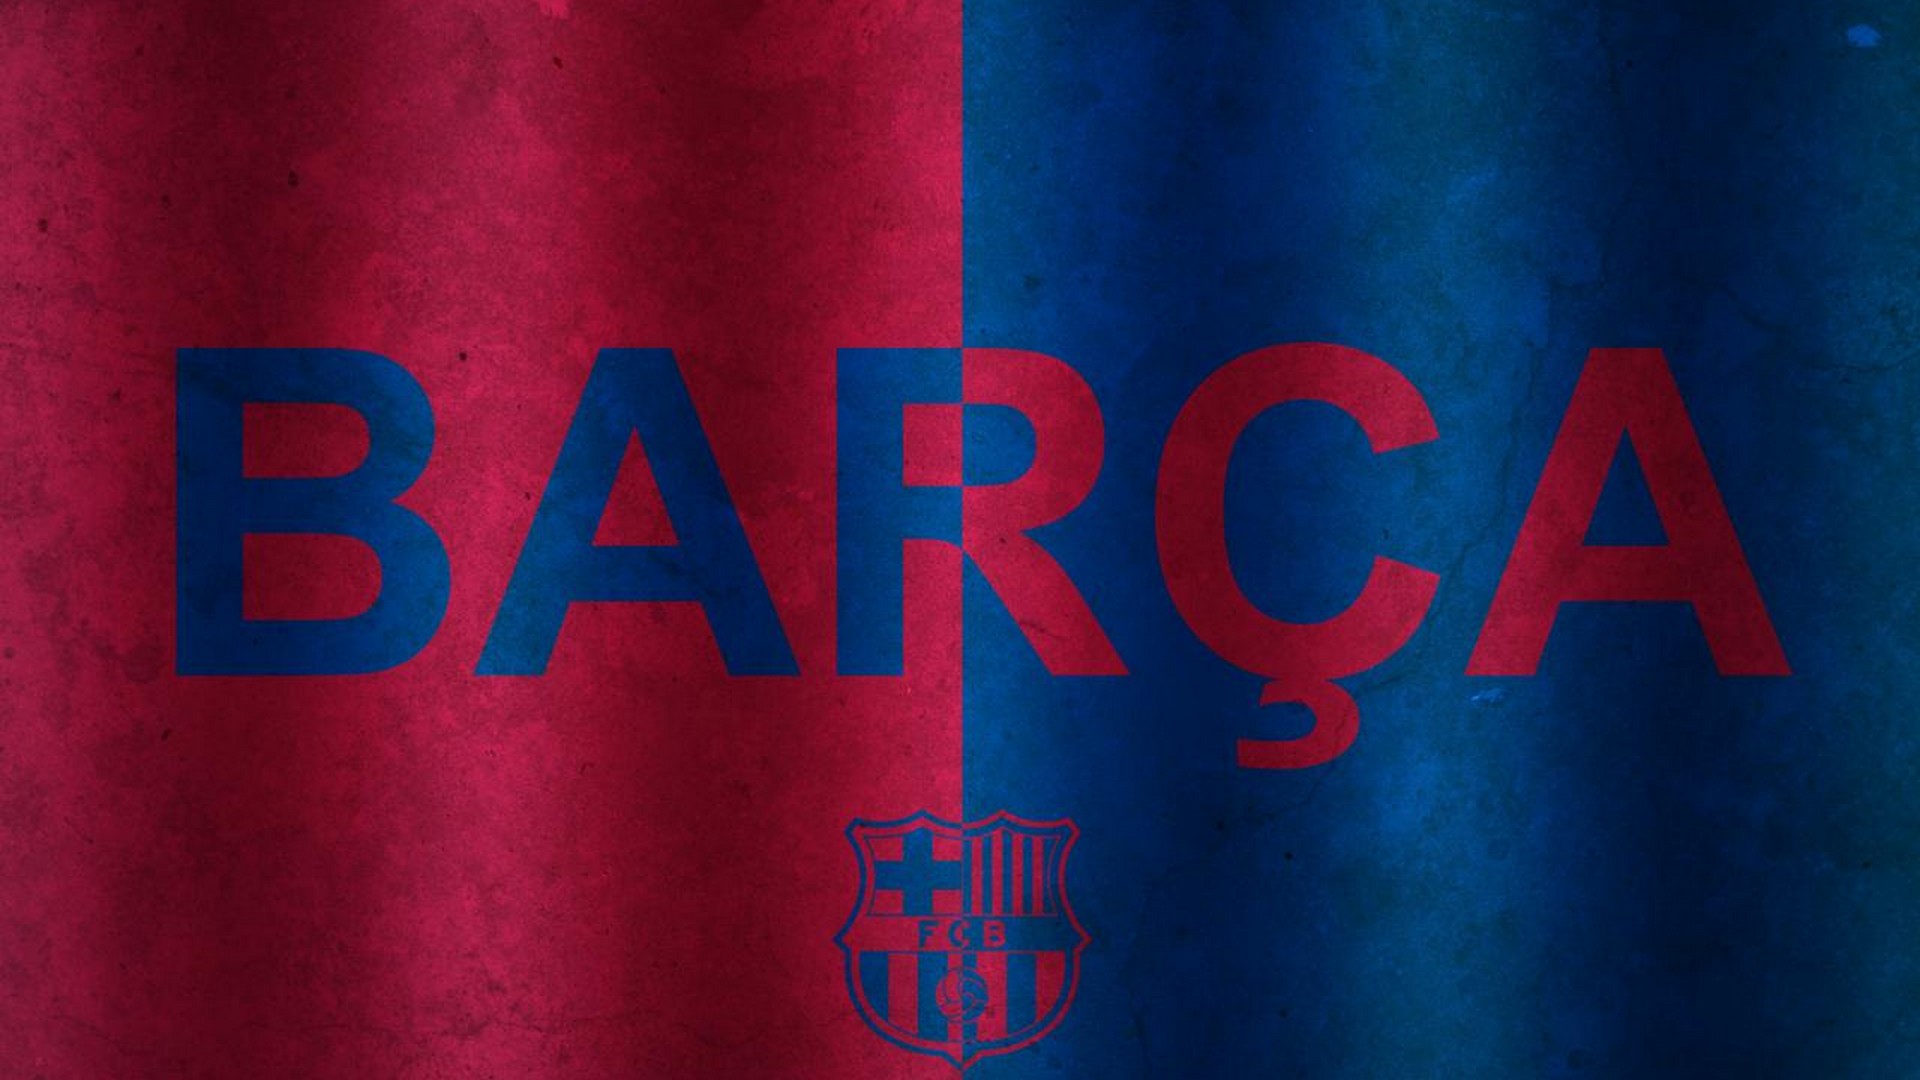 Barca HD Wallpapers with high-resolution 1920x1080 pixel. You can use this wallpaper for your Desktop Computers, Mac Screensavers, Windows Backgrounds, iPhone Wallpapers, Tablet or Android Lock screen and another Mobile device